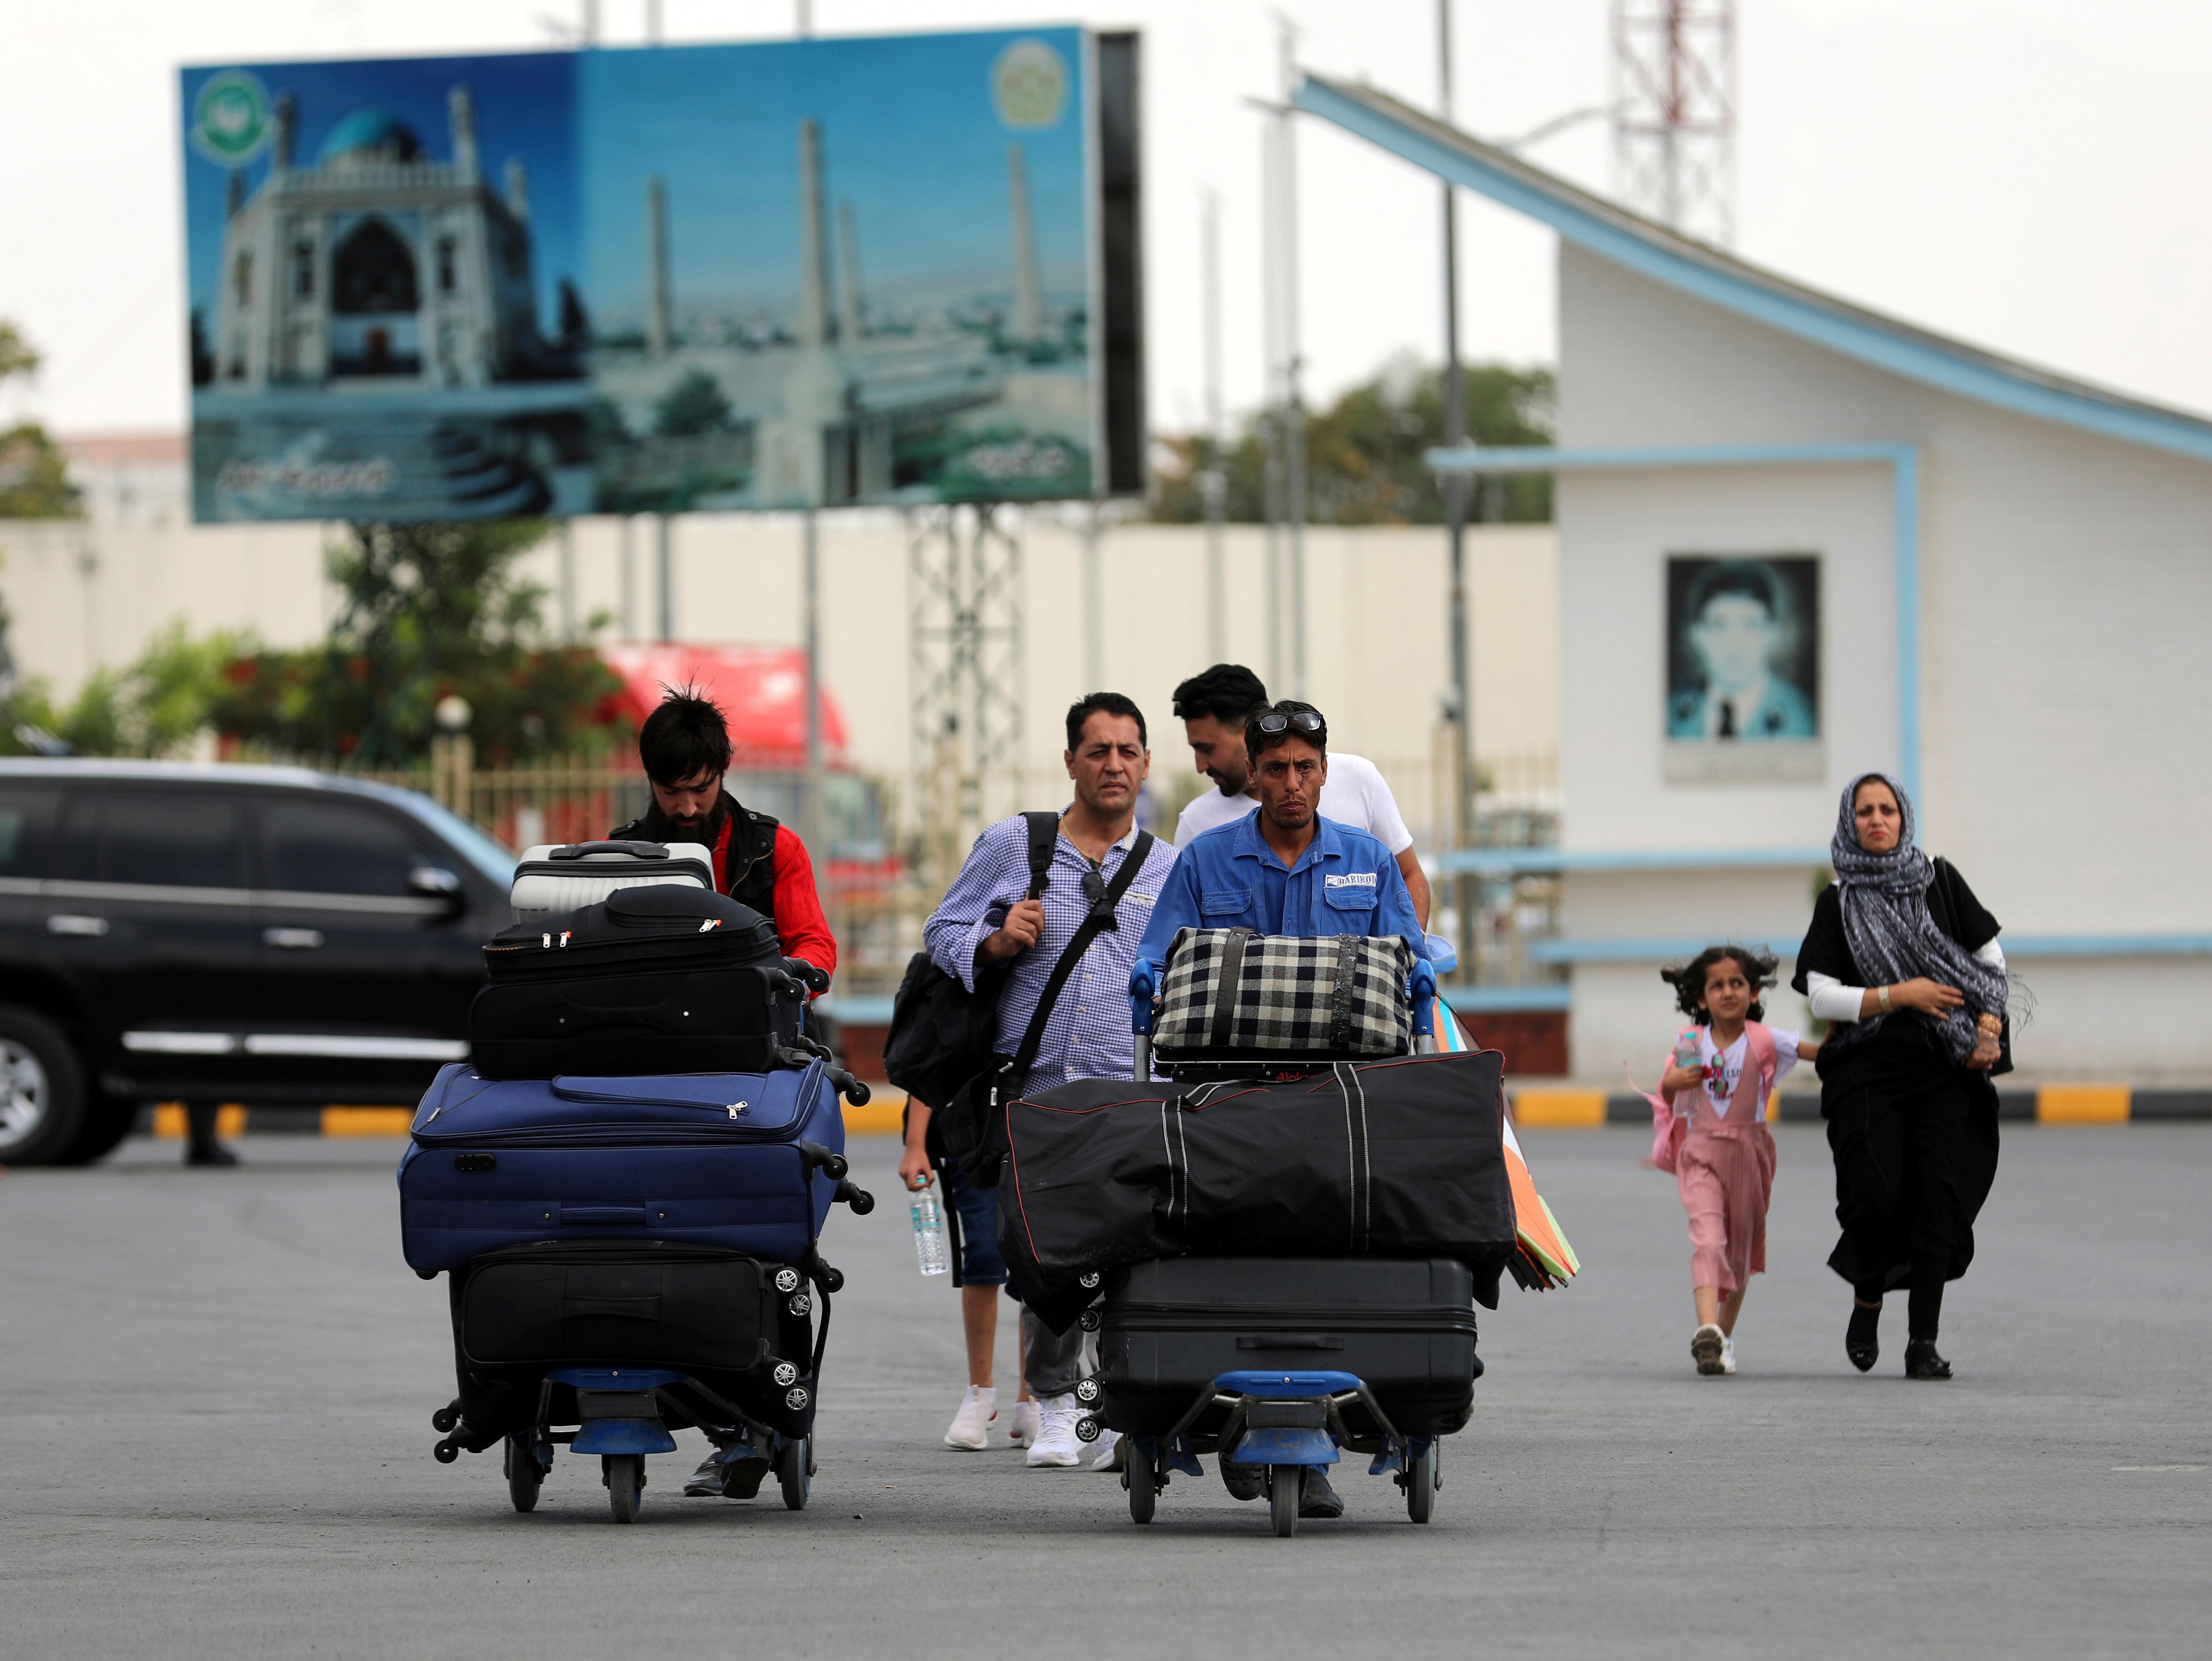 Passengers walk to the departures terminal of Hamid Karzai International Airport in Kabul, Afghanistan, Saturday, Aug. 14, 20